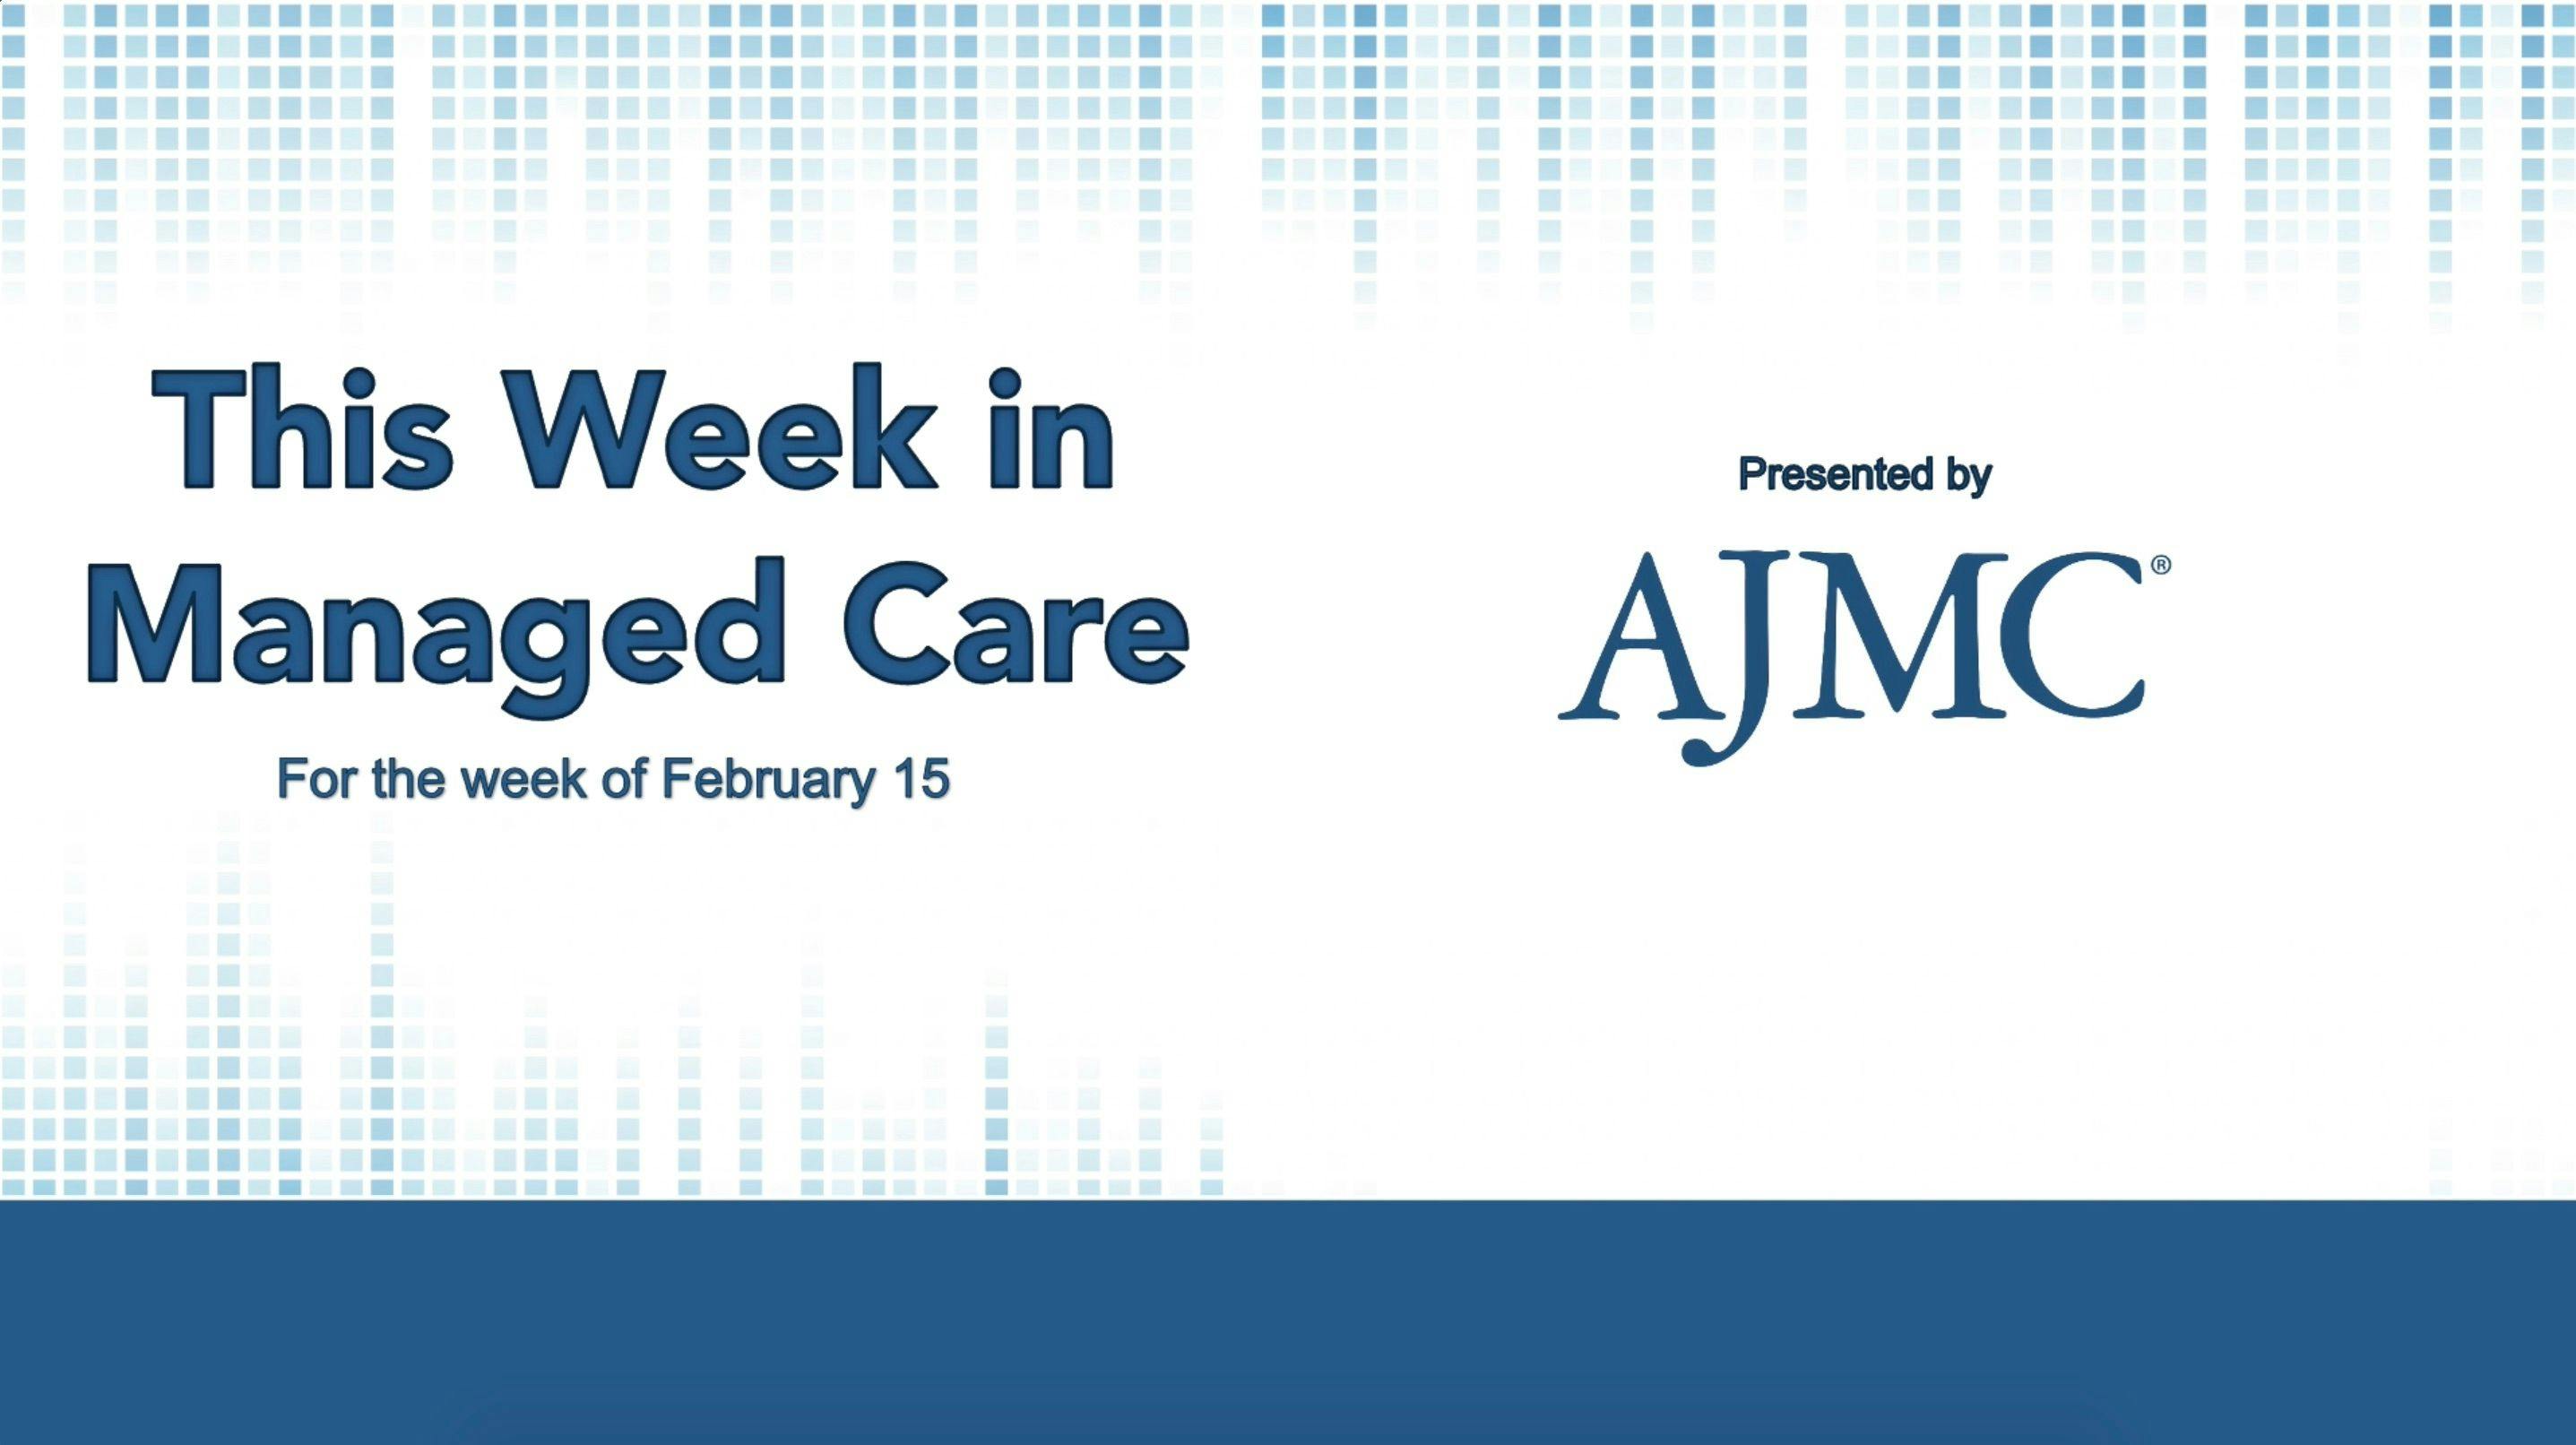 This Week in Managed Care: February 19, 2021